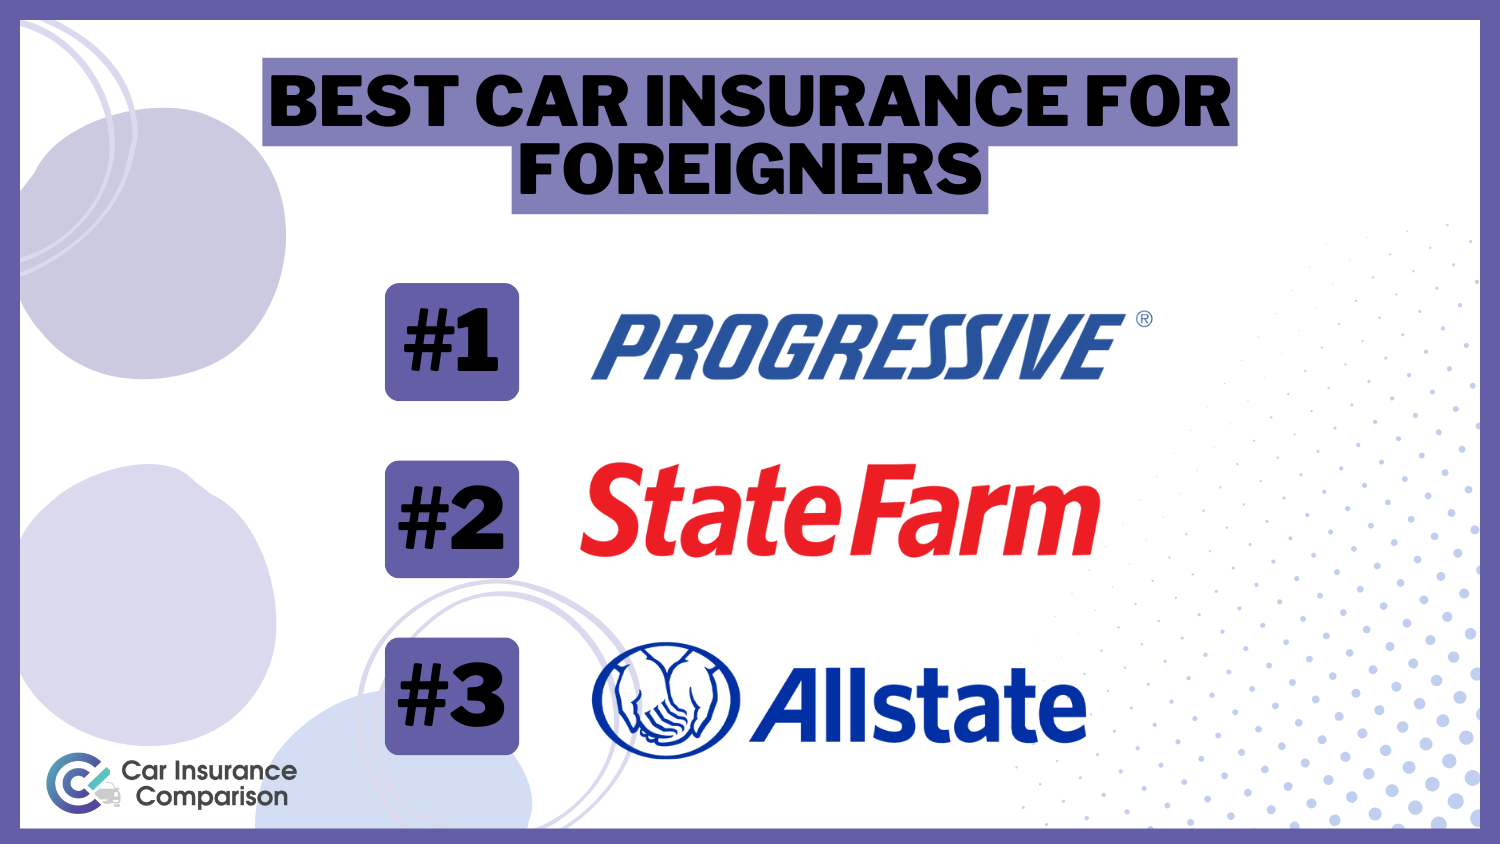 Best Car Insurance for Foreigners: Progressive, State Farm, and Allstate